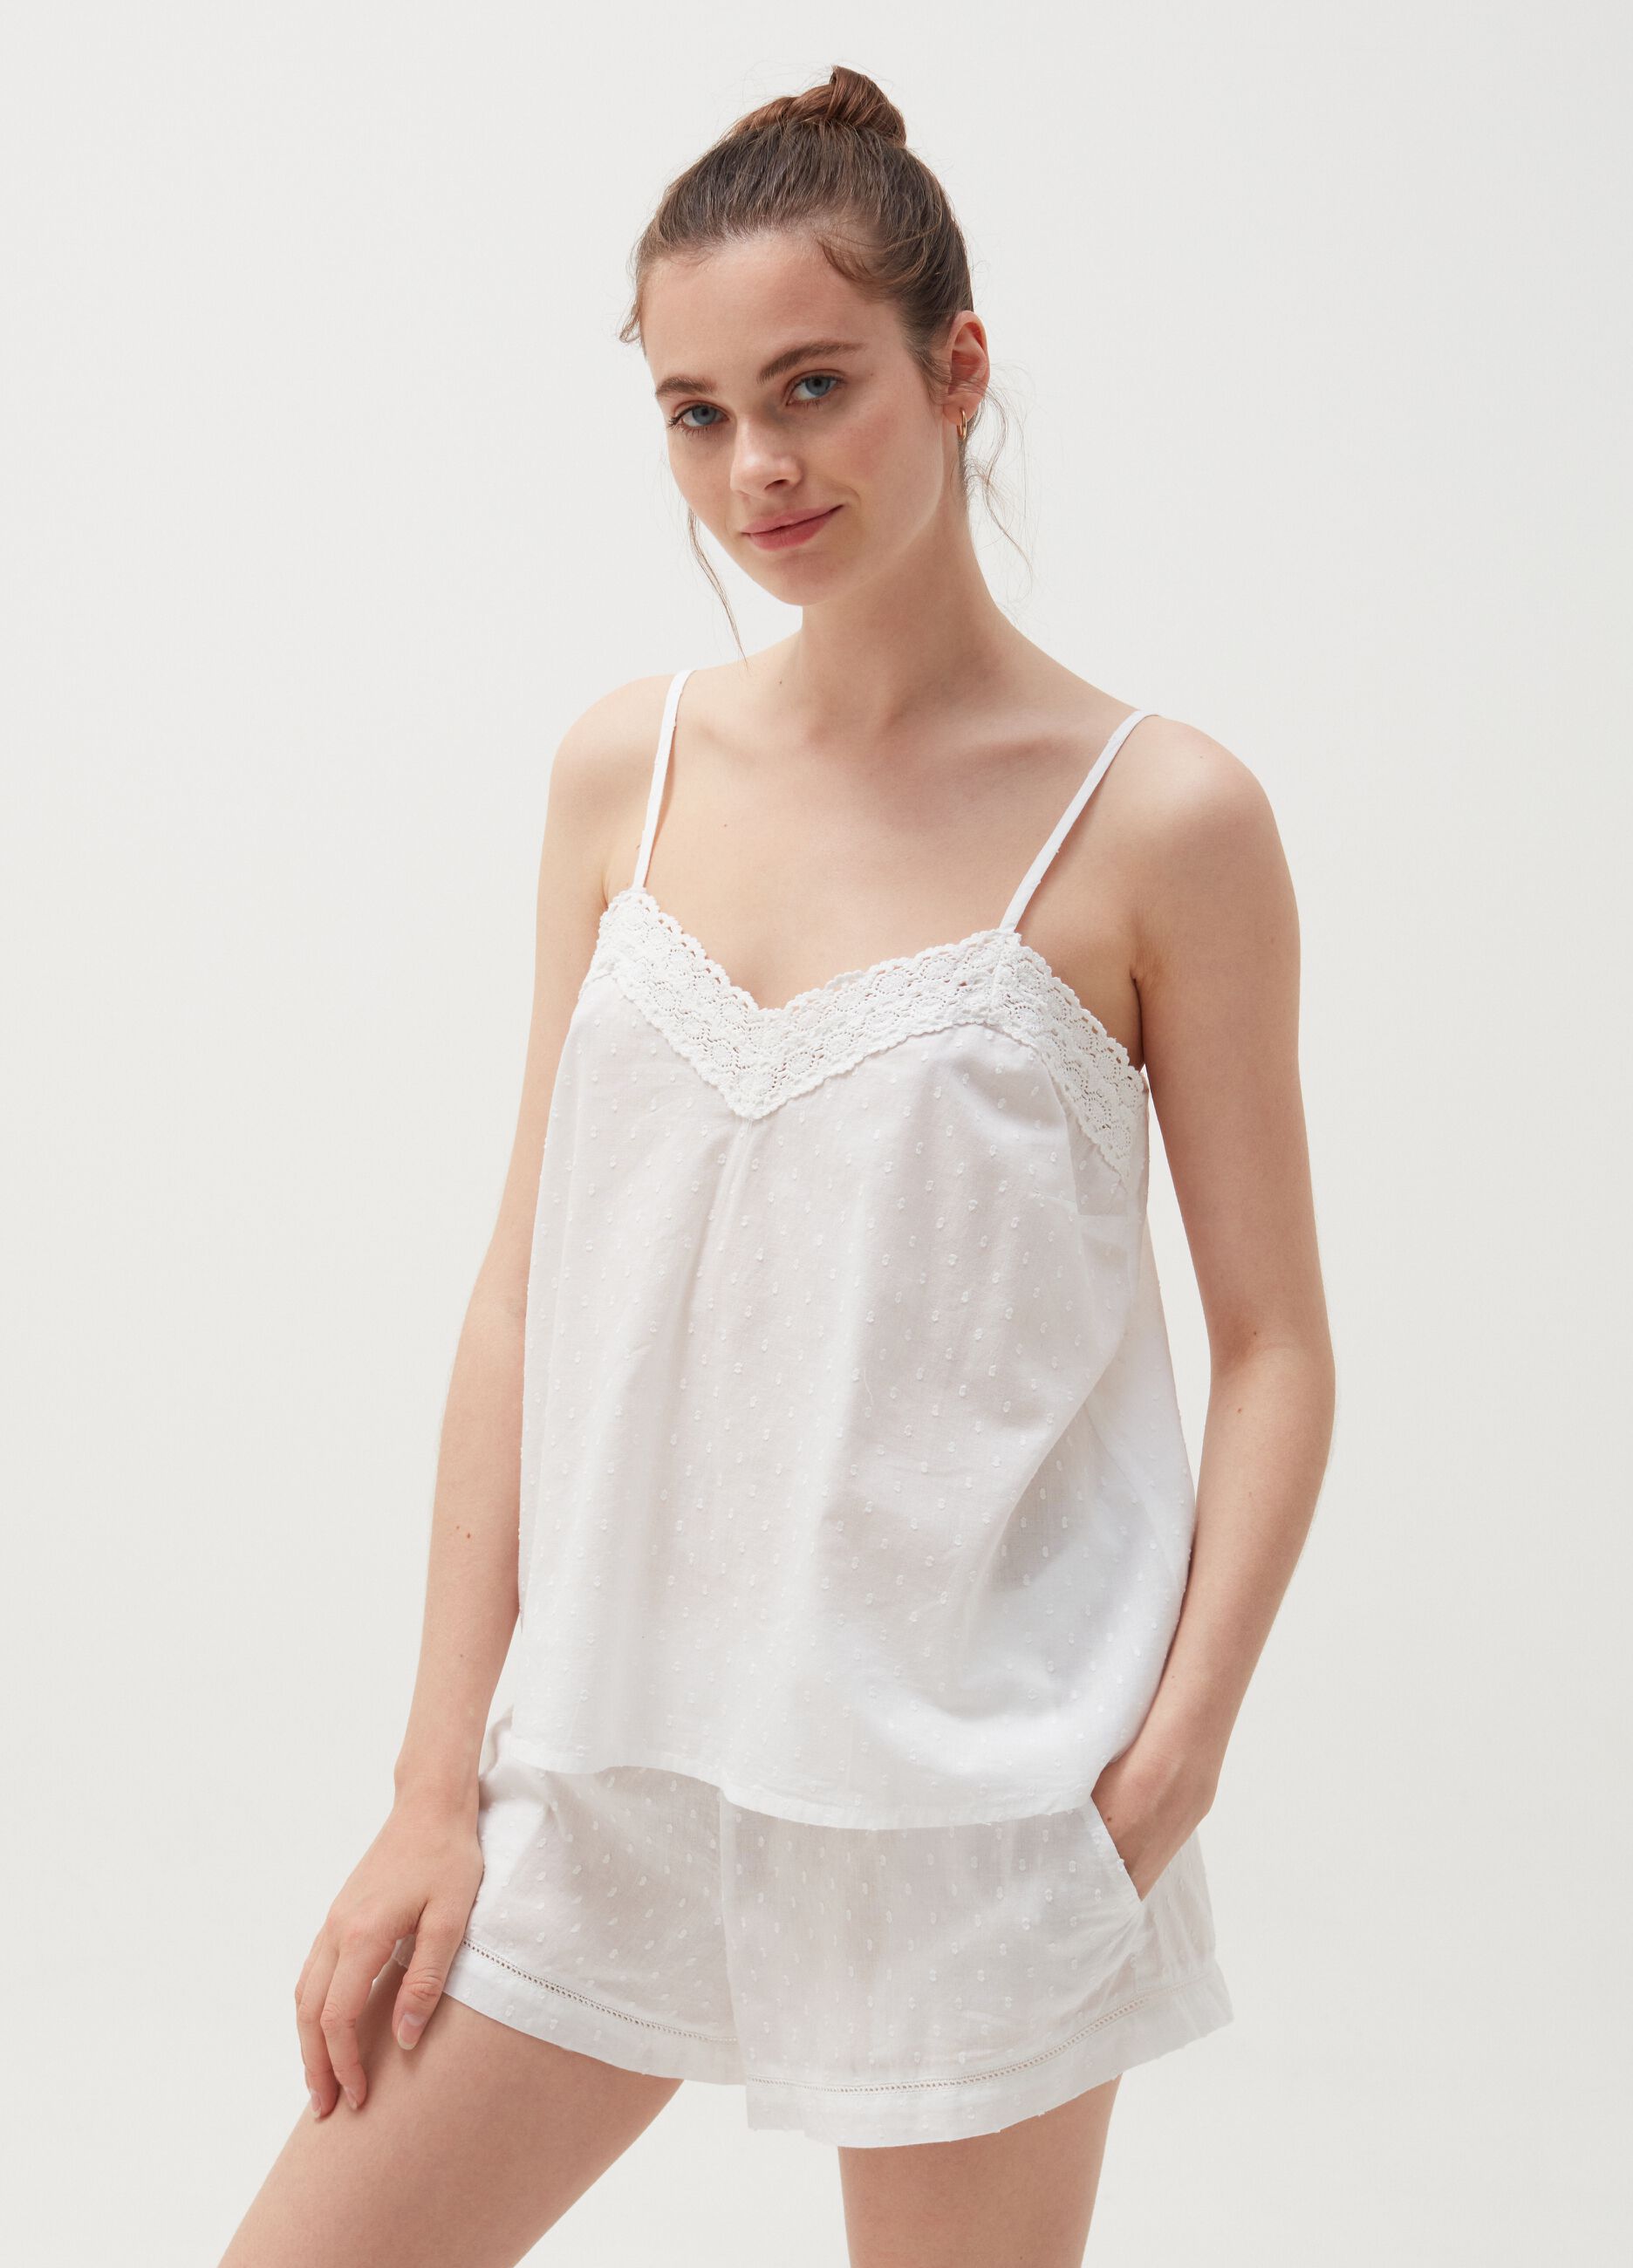 Pyjama top in cotton dobby with lace